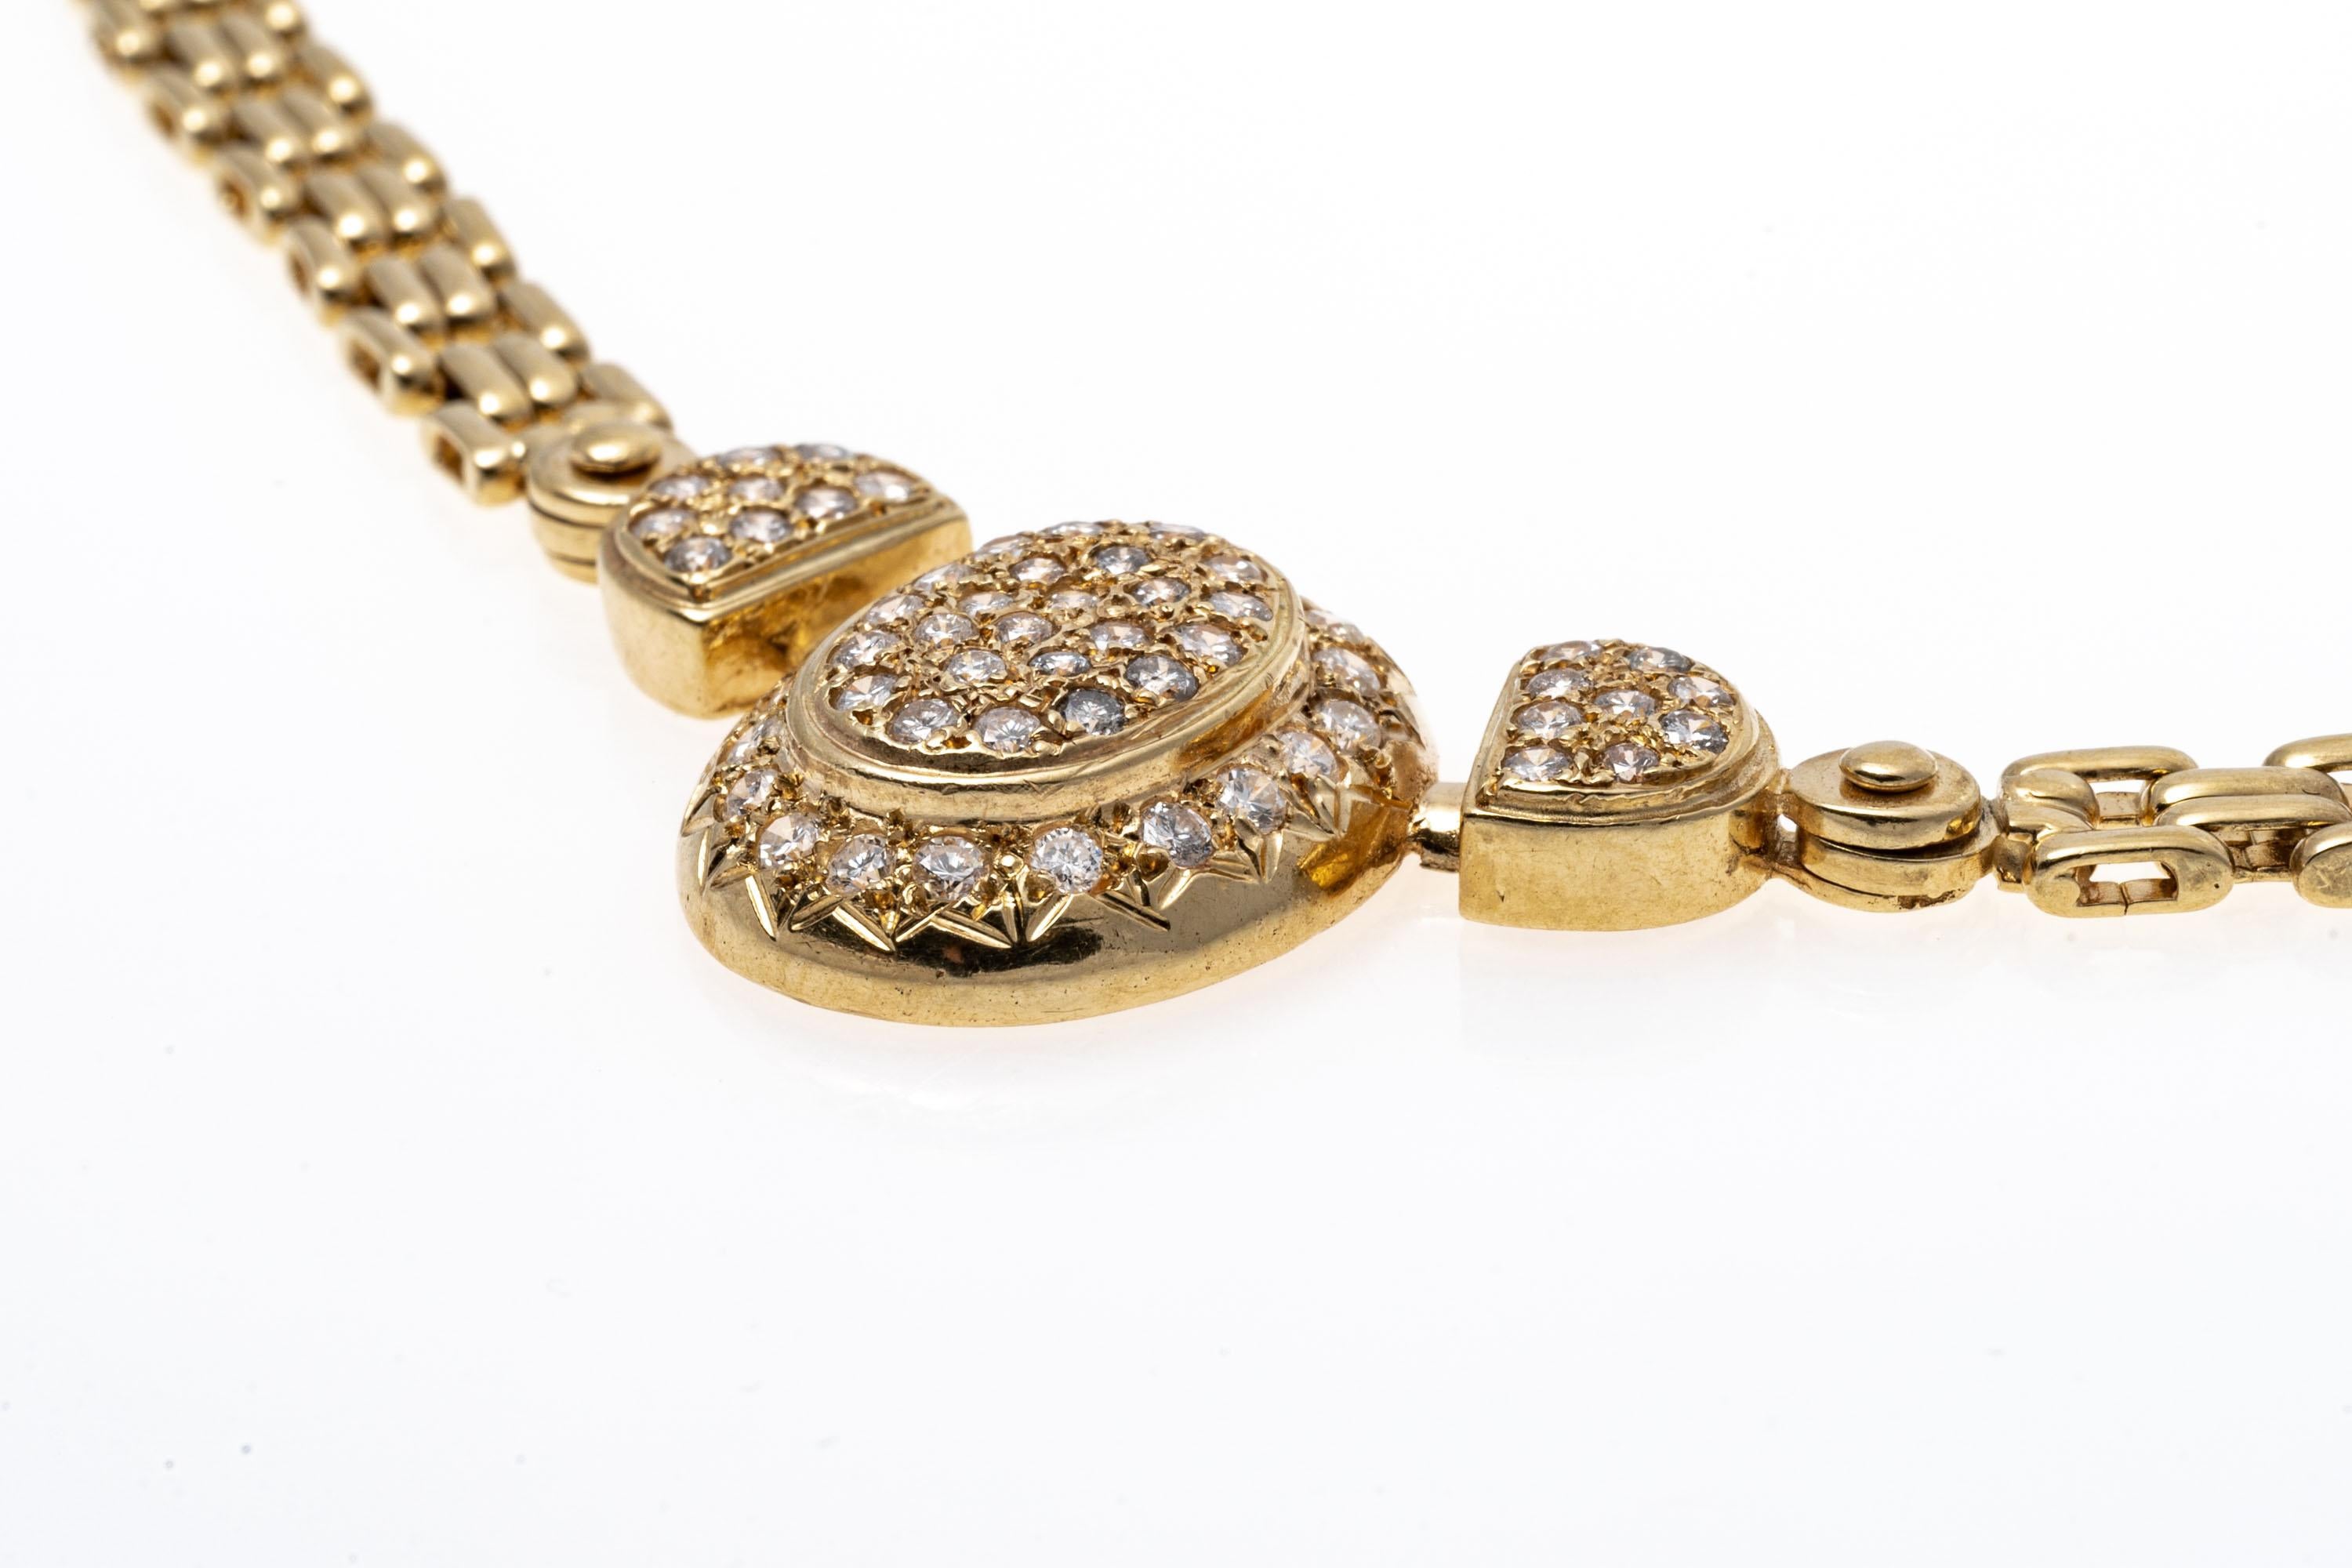 14K Gold And Diamond Italian Necklace. With a classic design this stylish necklace has polished yellow gold links leading to a centered pendant set with diamonds for a brilliant shine. Diamonds are approximately 0.8 TCW. Hinged box style